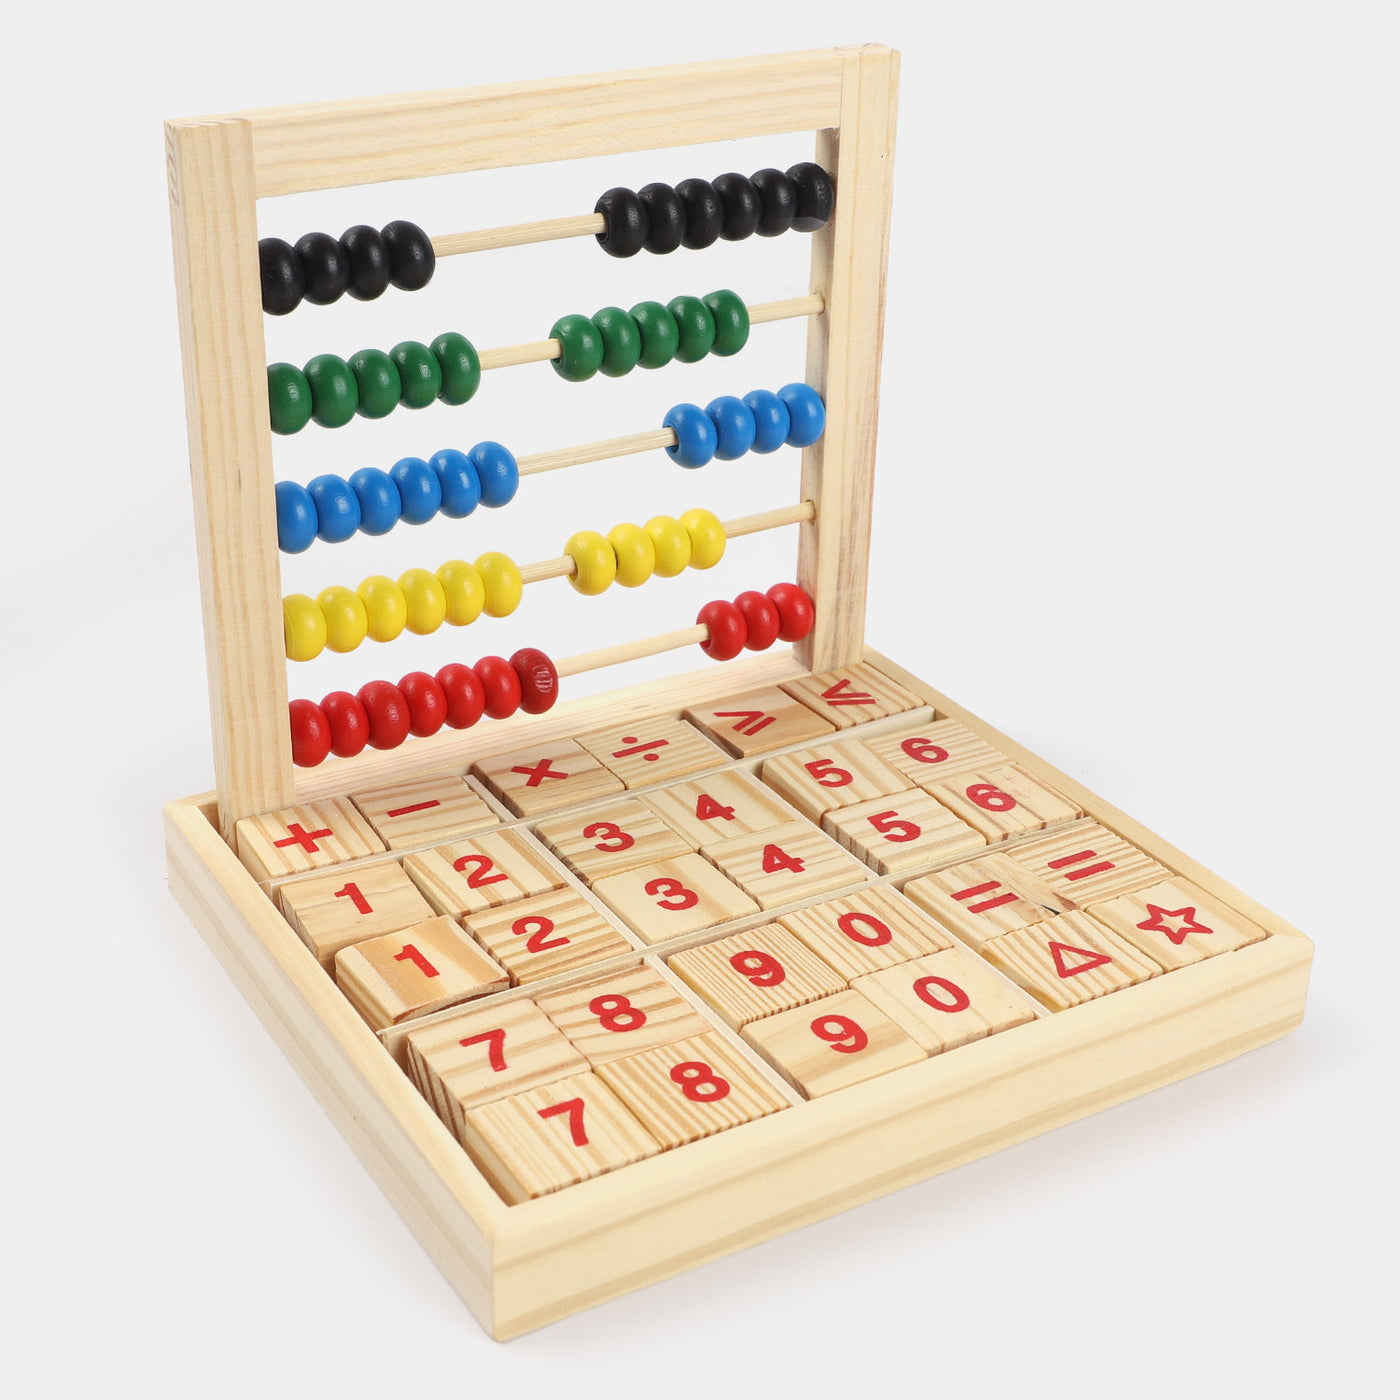 Wooden Abacus Study Blocks Toy